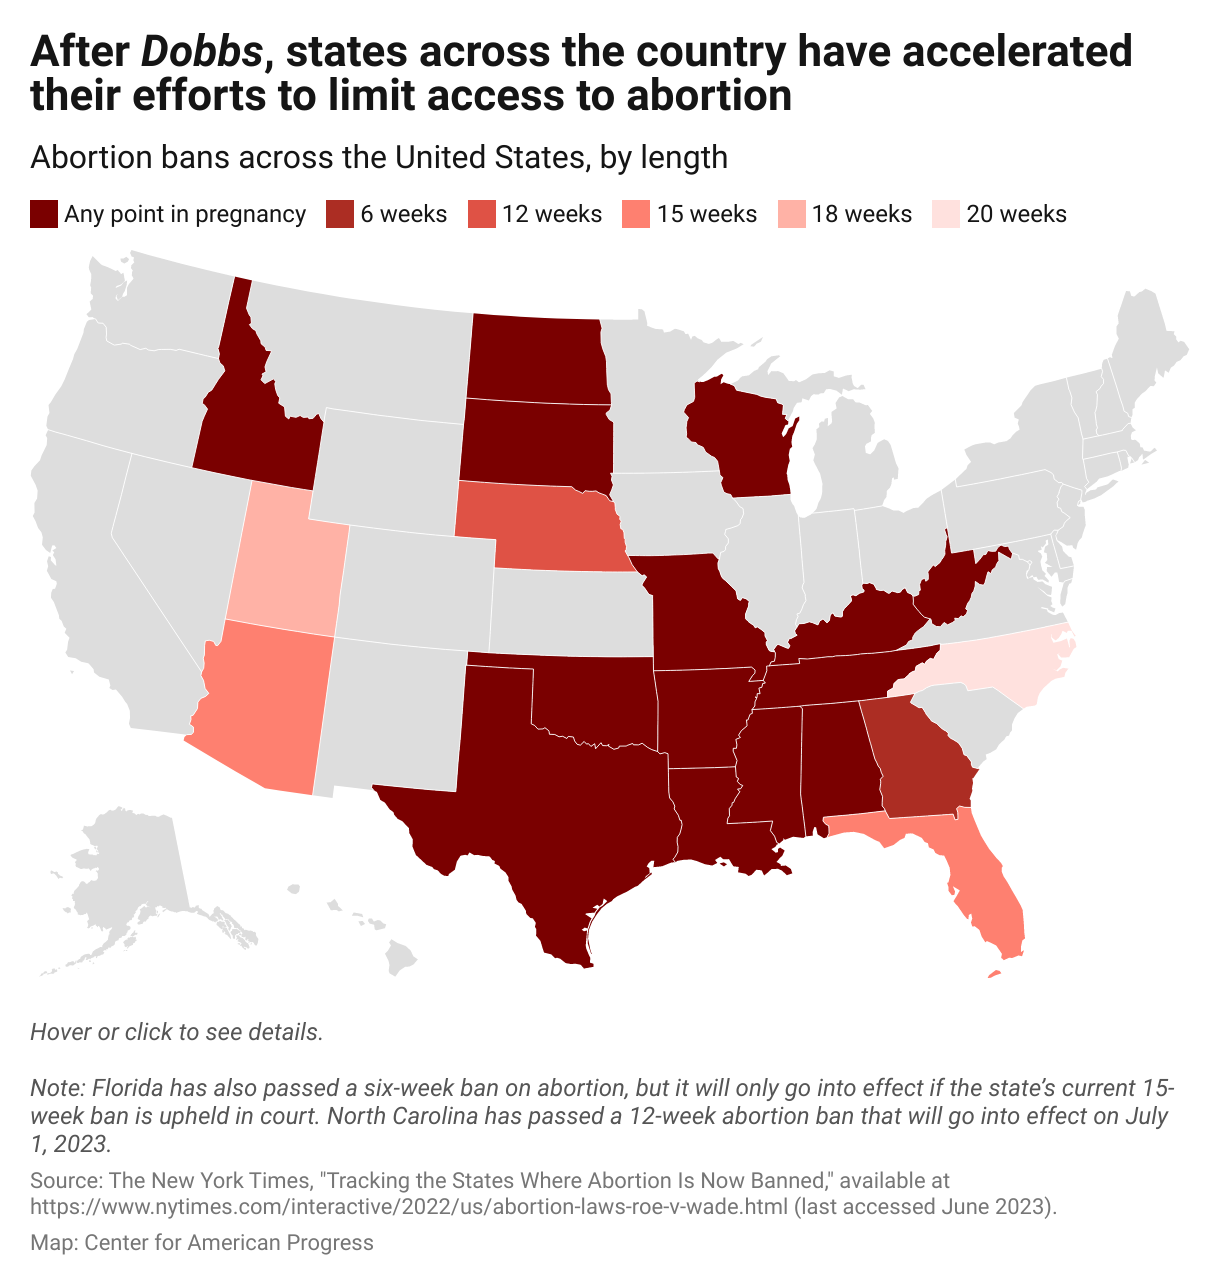 Map showing the states that have near-total abortion bans in effect and those that have implemented abortion bans from six to 20 weeks.